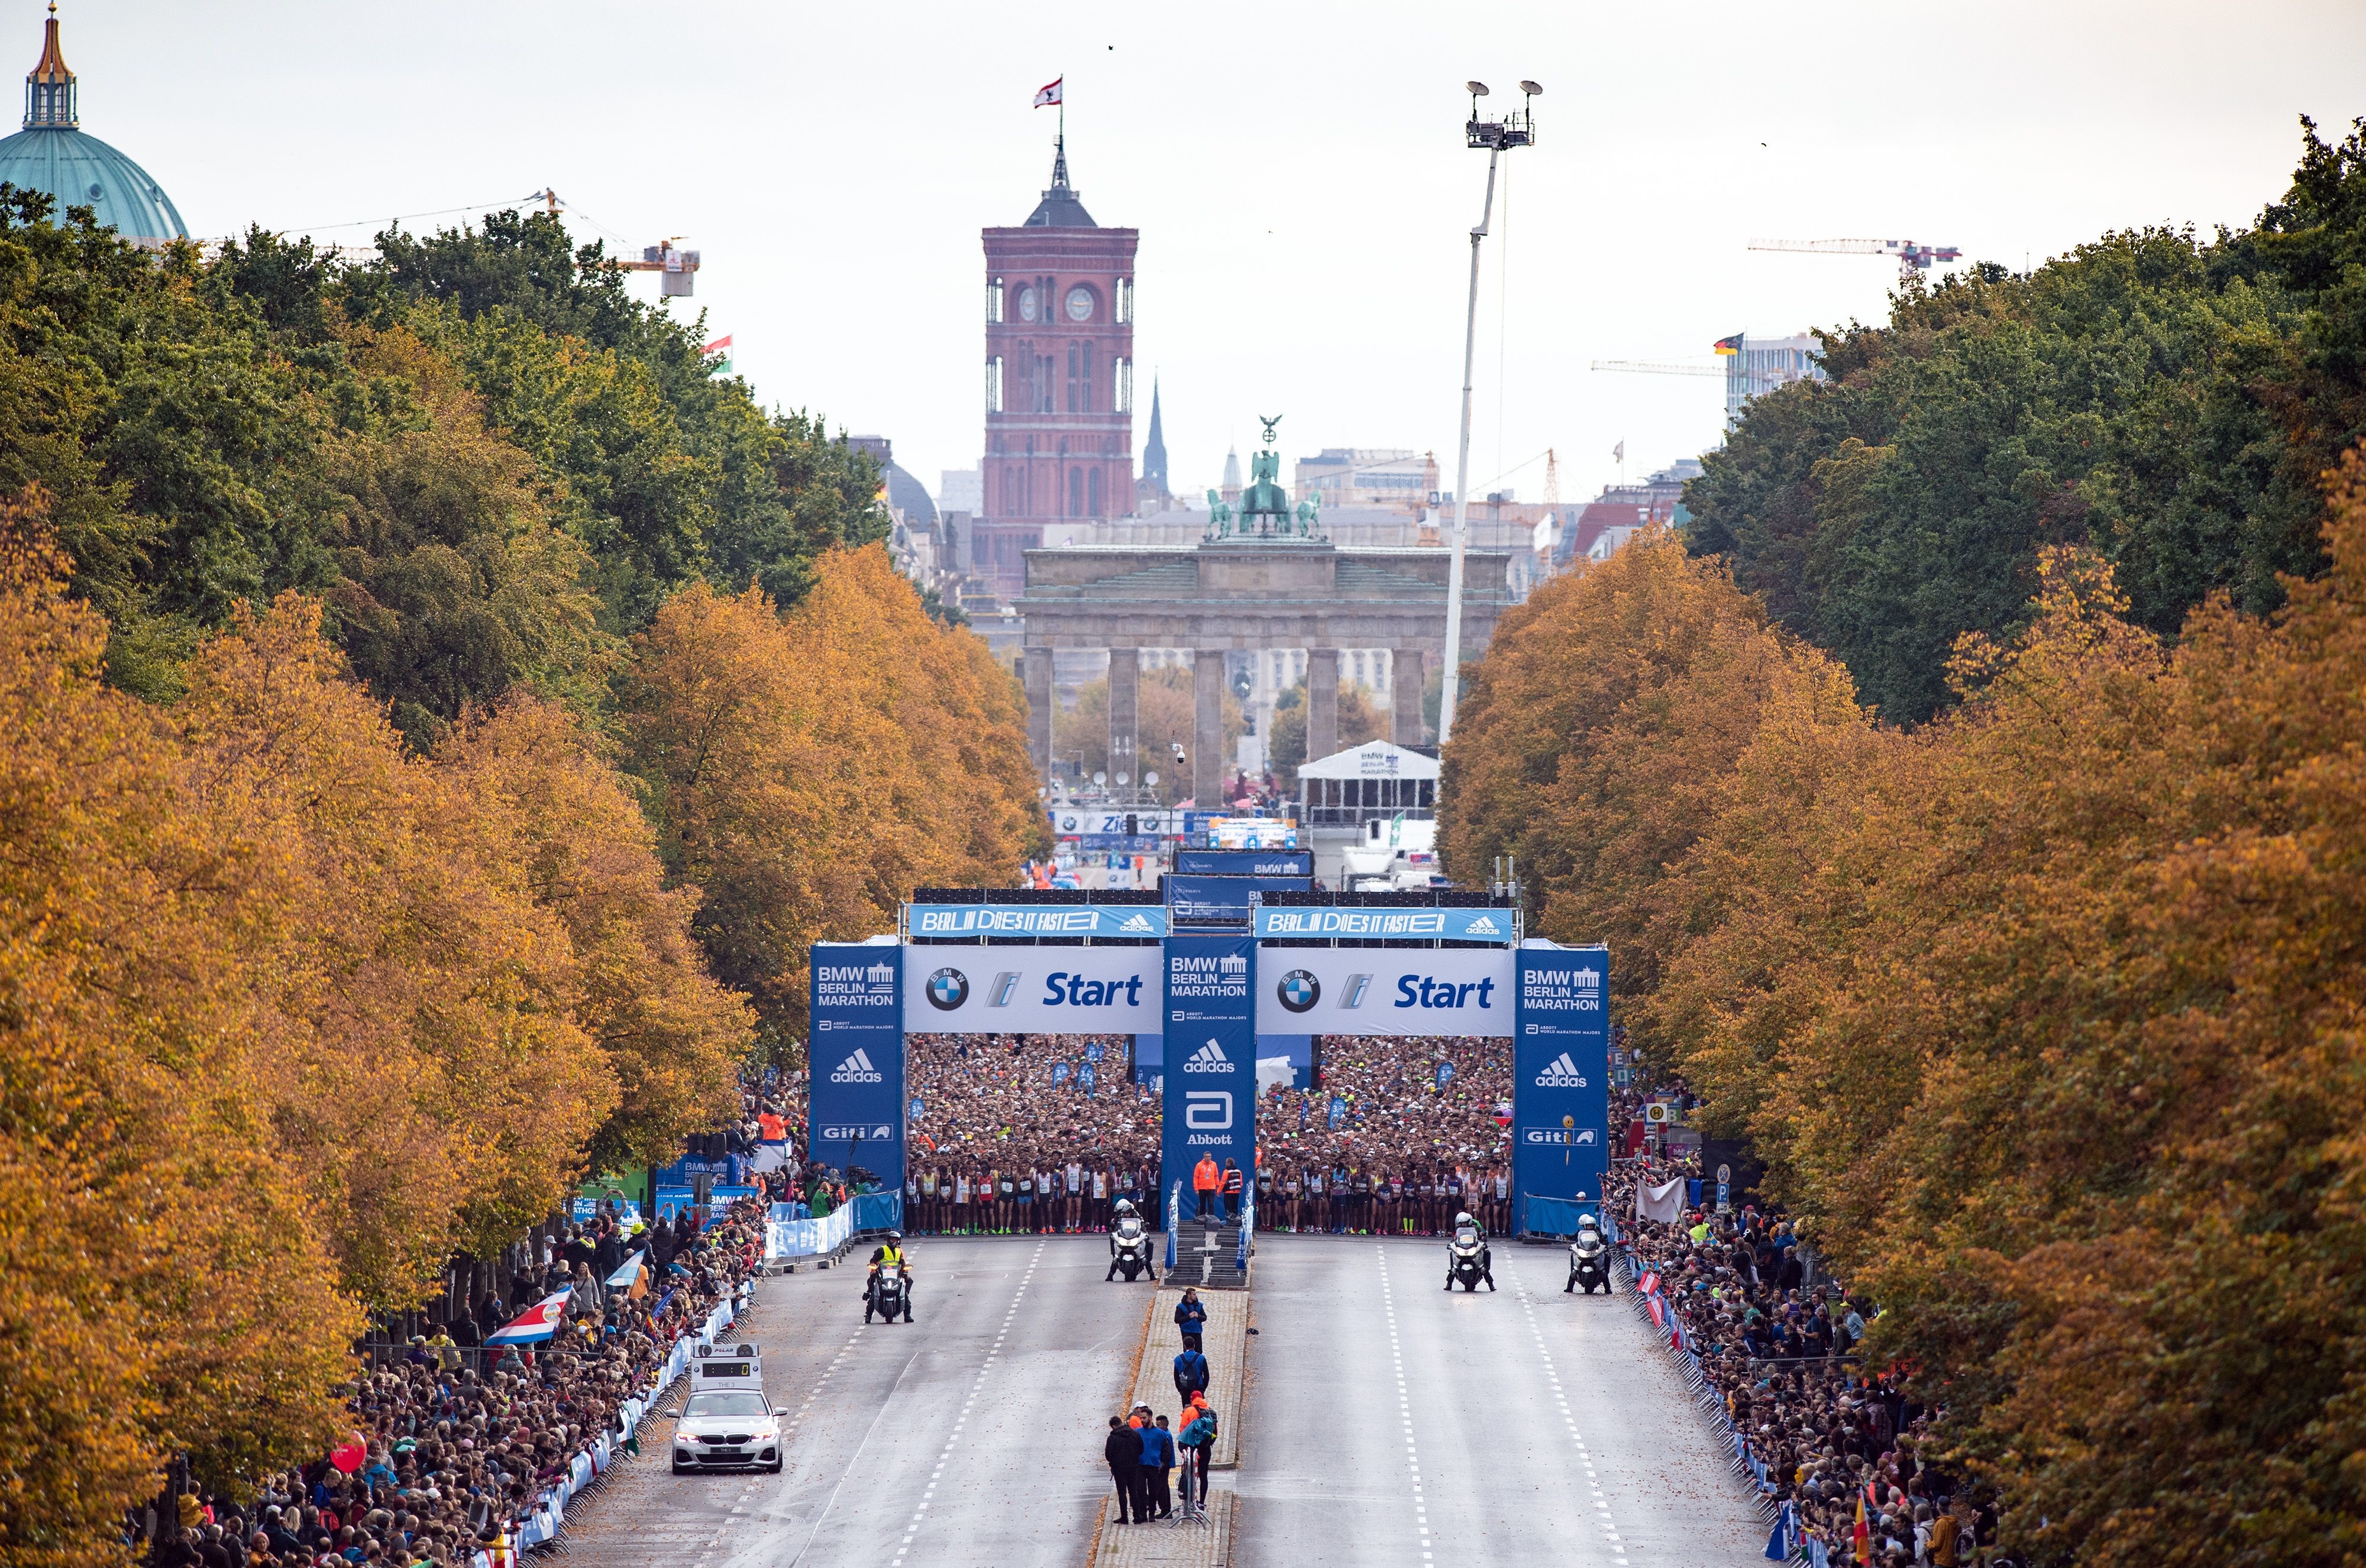 The Berlin Marathon canÂ´t be held as planned in September because of new restrictions in the city related to the coronavirus pandemic